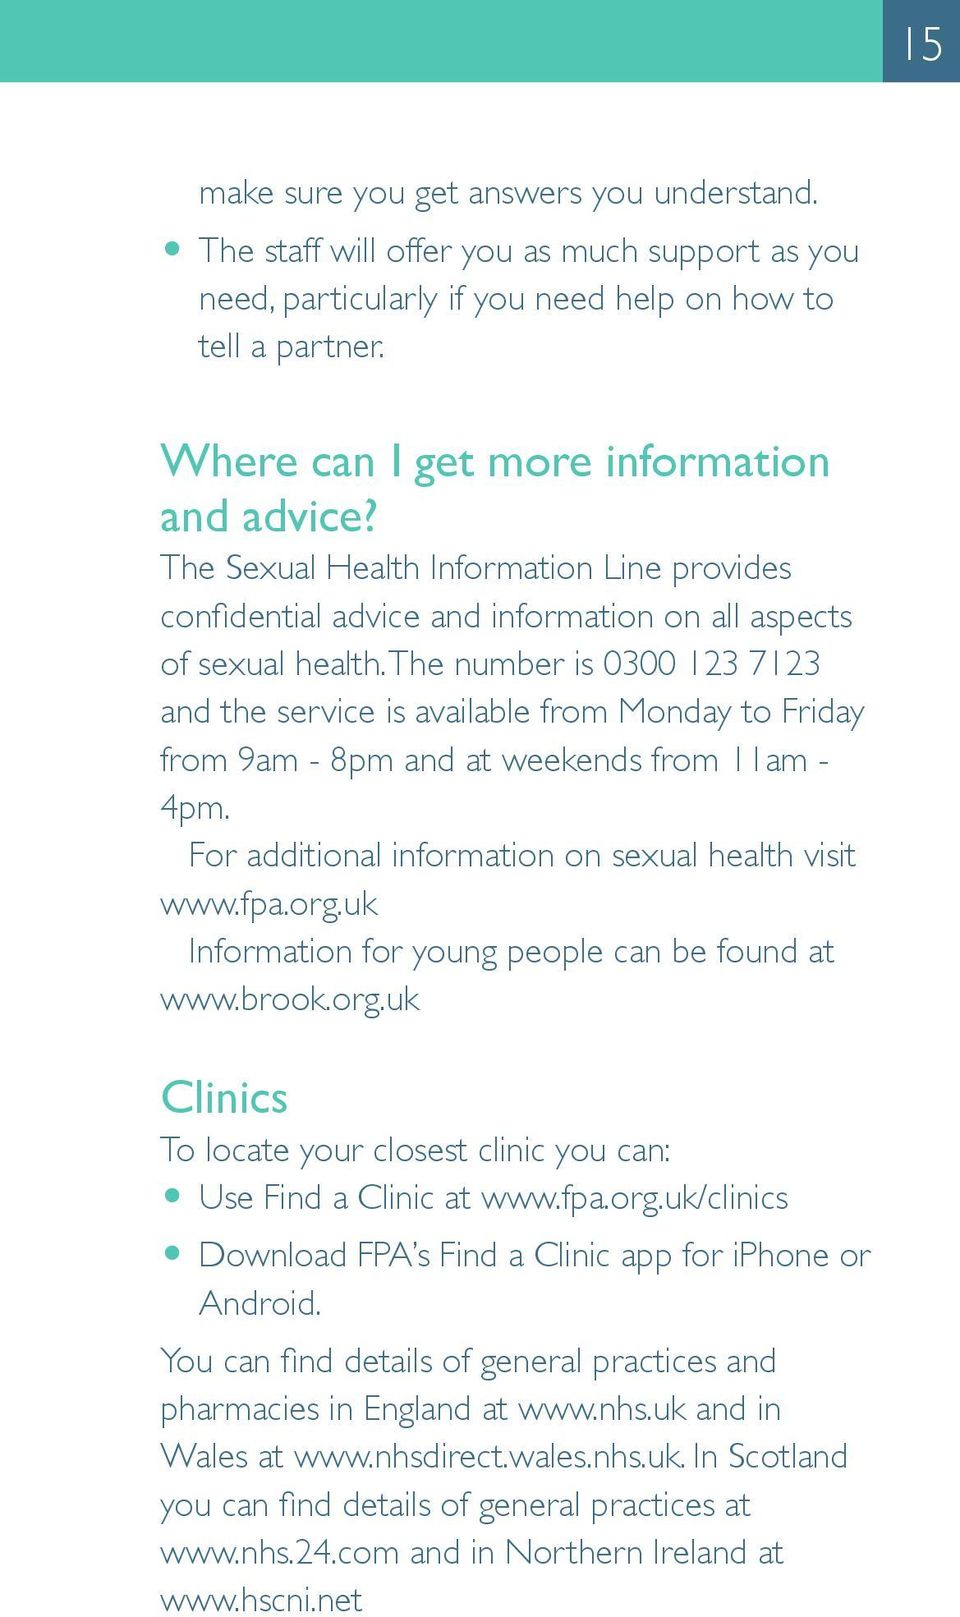 The number is 0300 123 7123 and the service is available from Monday to Friday from 9am - 8pm and at weekends from 11am - 4pm. For additional information on sexual health visit www.fpa.org.